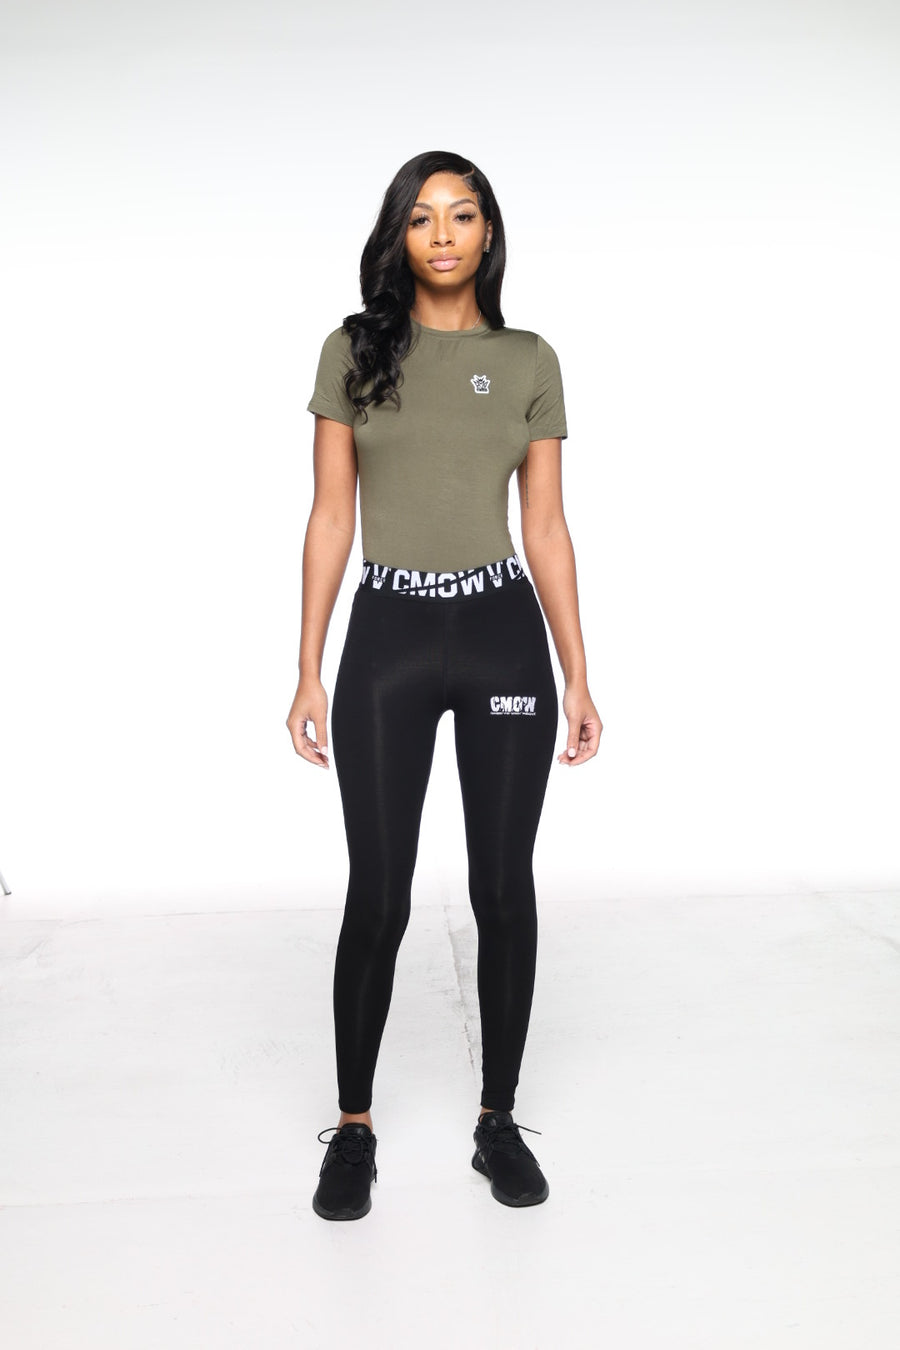 Women’s Cop & Carry Tights